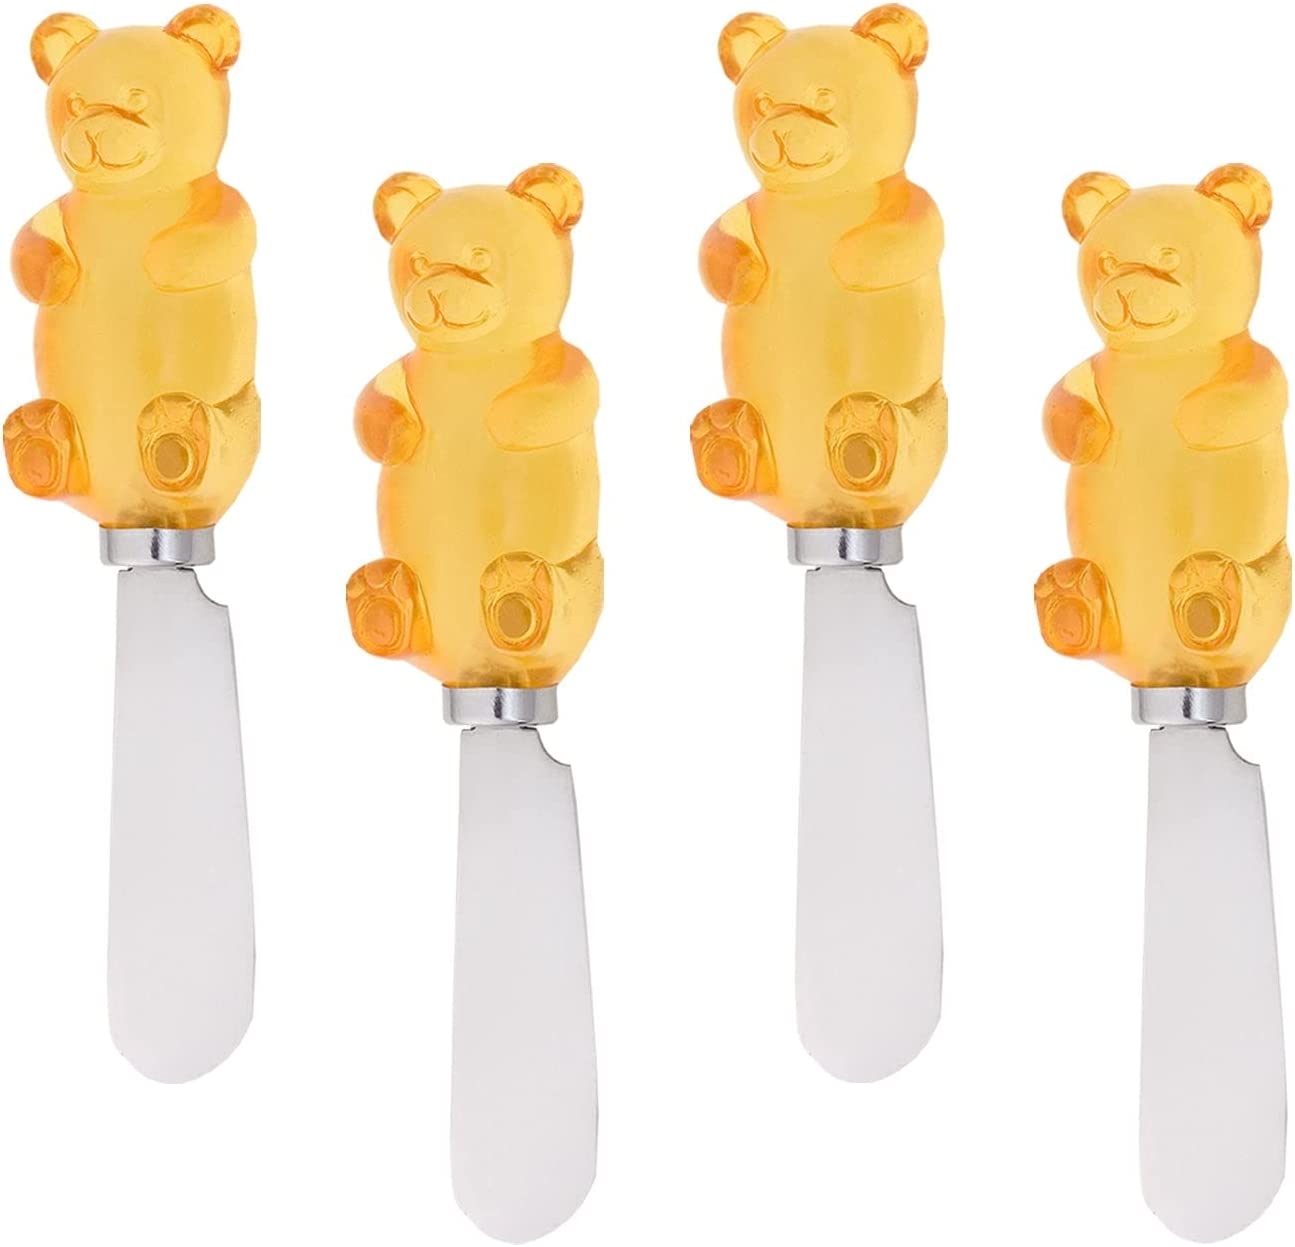 Supreme Housewares 4-Piece Hand Painted Resin Handle with Stainless Steel Blade Cheese Spreader, Butter Spreader knives (Fleur